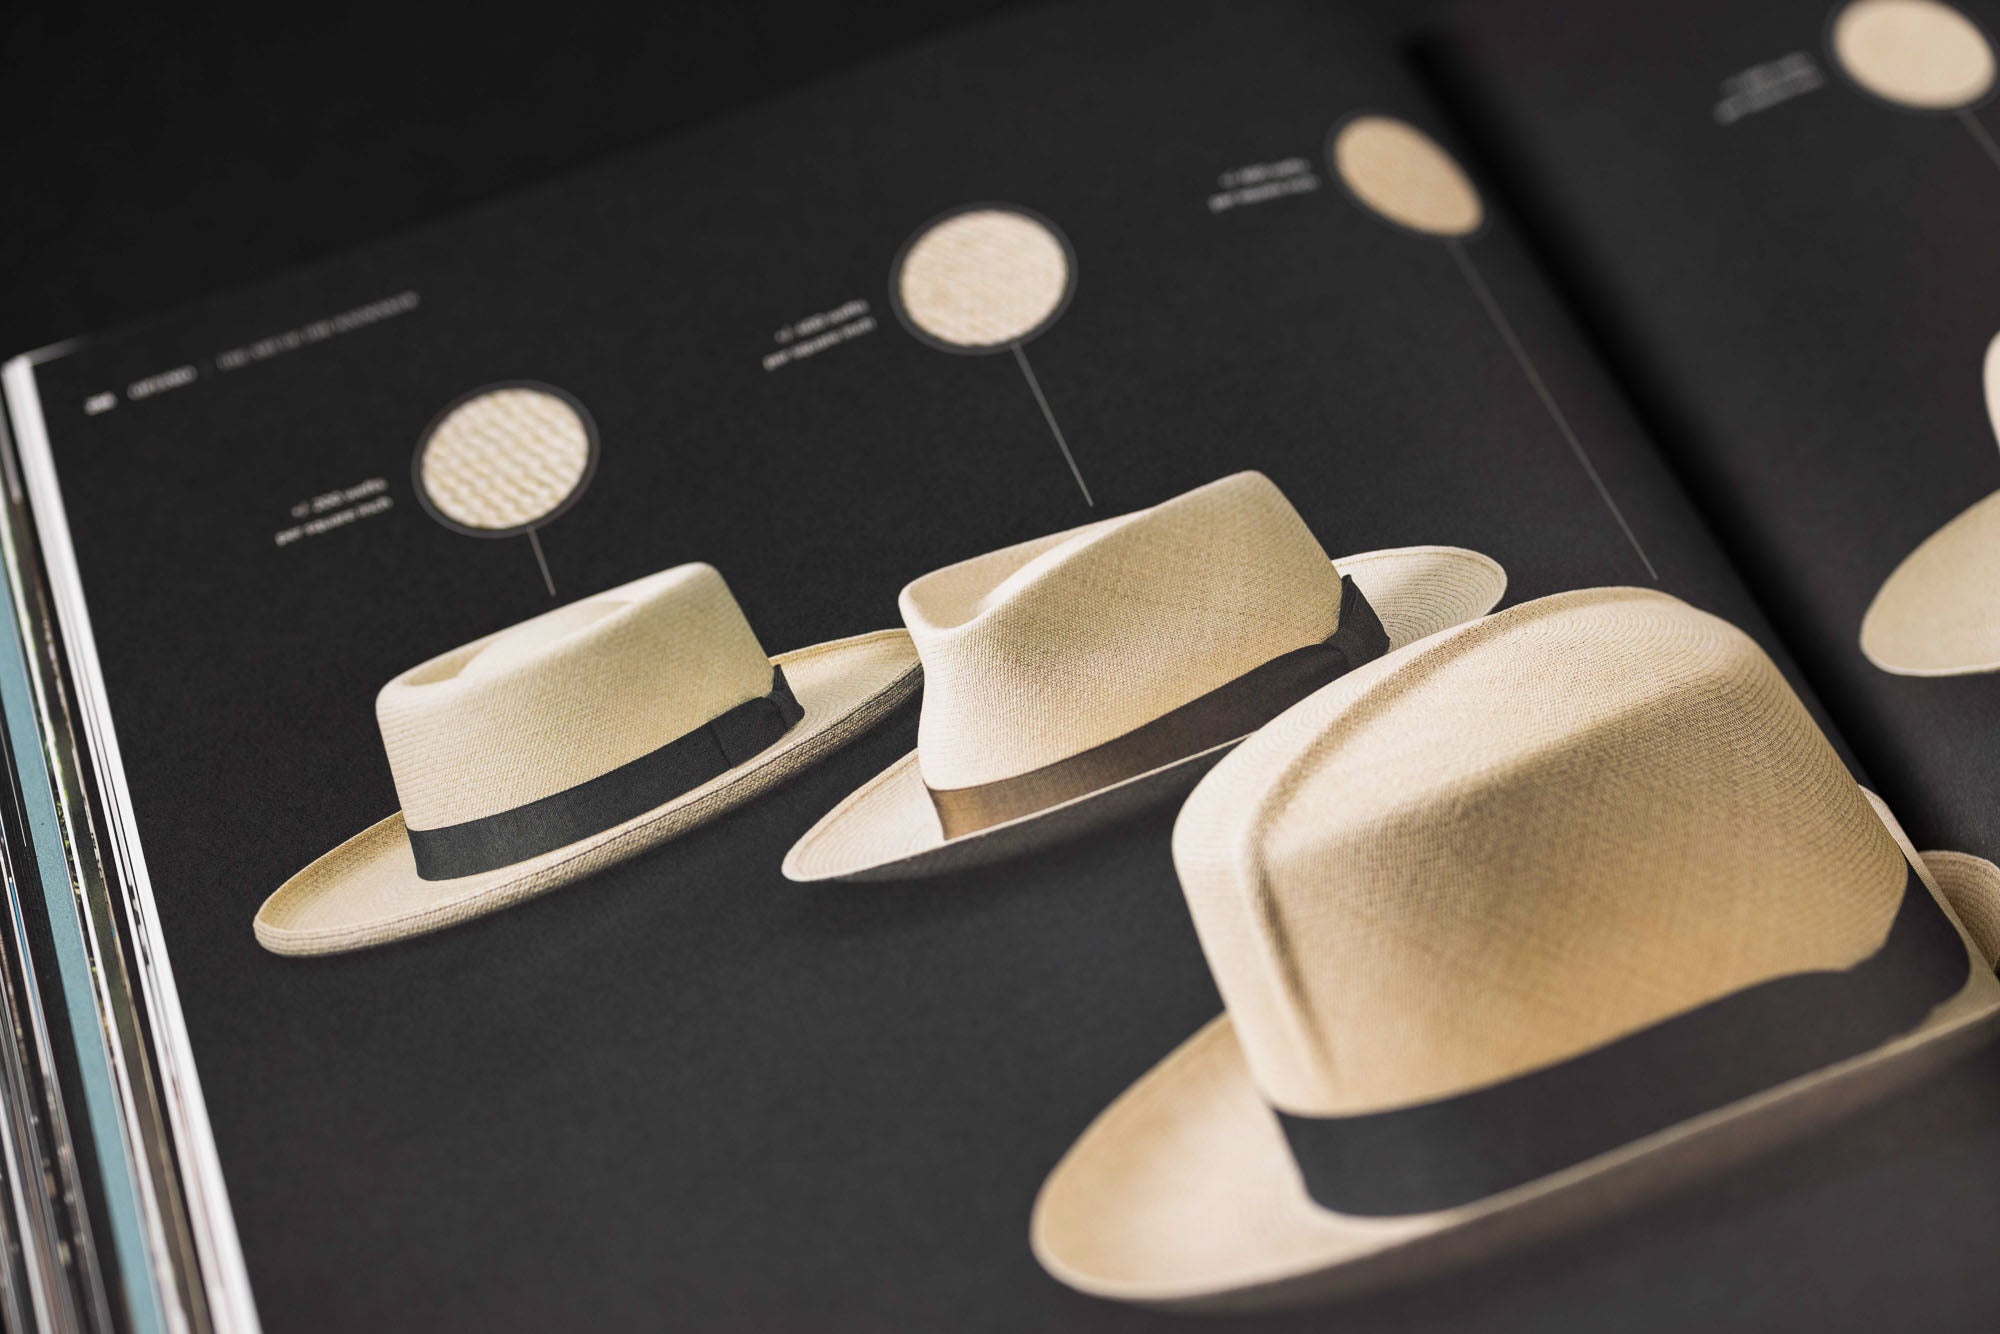 A book featuring a variety of exquisite hats, including the finest creations from Optimo Hats: The Art of the Hatmaker by KirbyAllison.com.